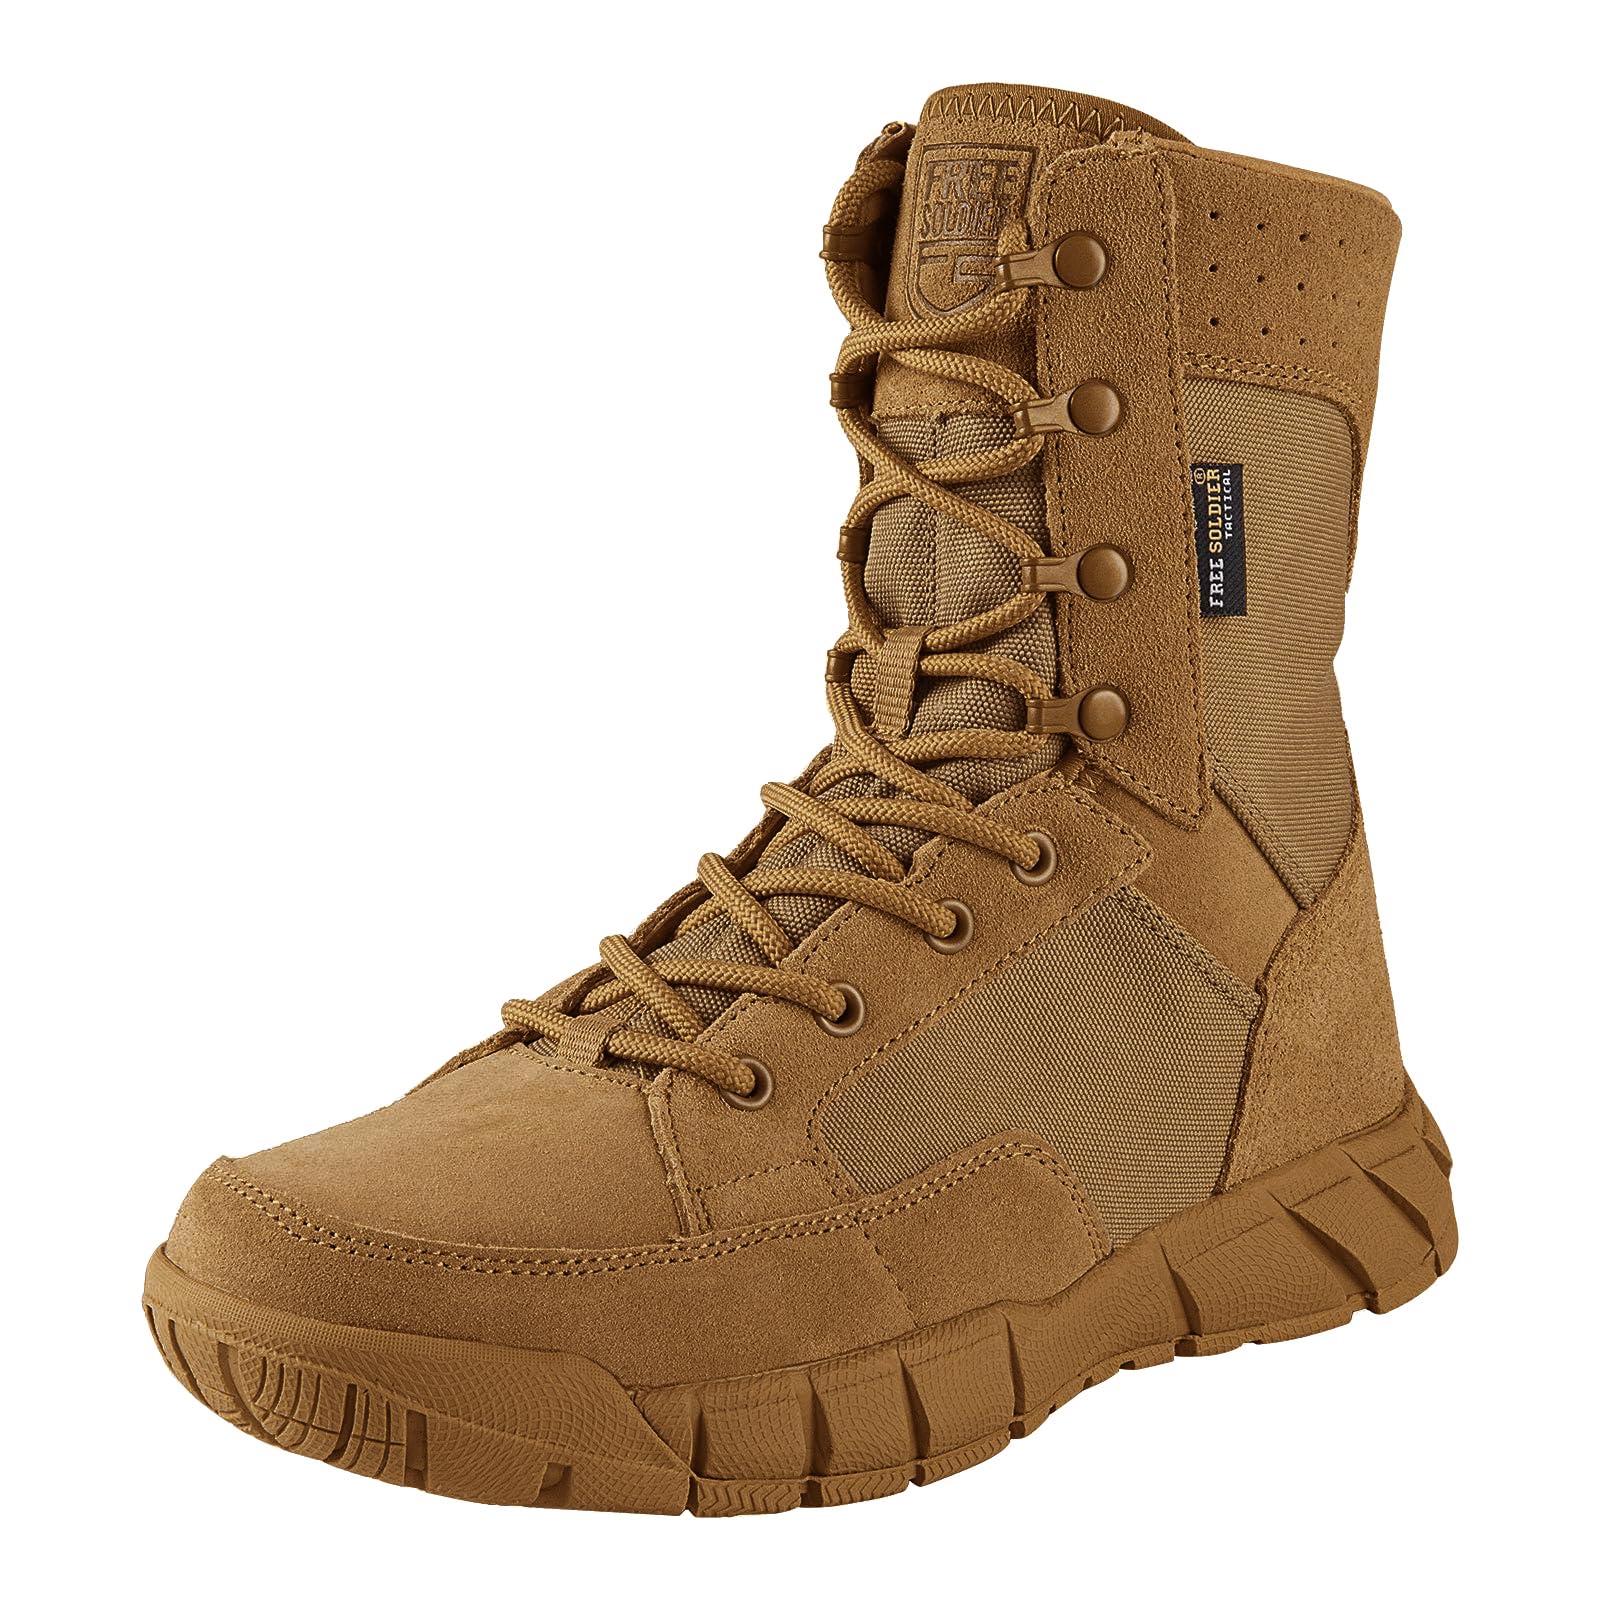 Free Soldier®: High Quality Tactical Gear, Boots & Clothing